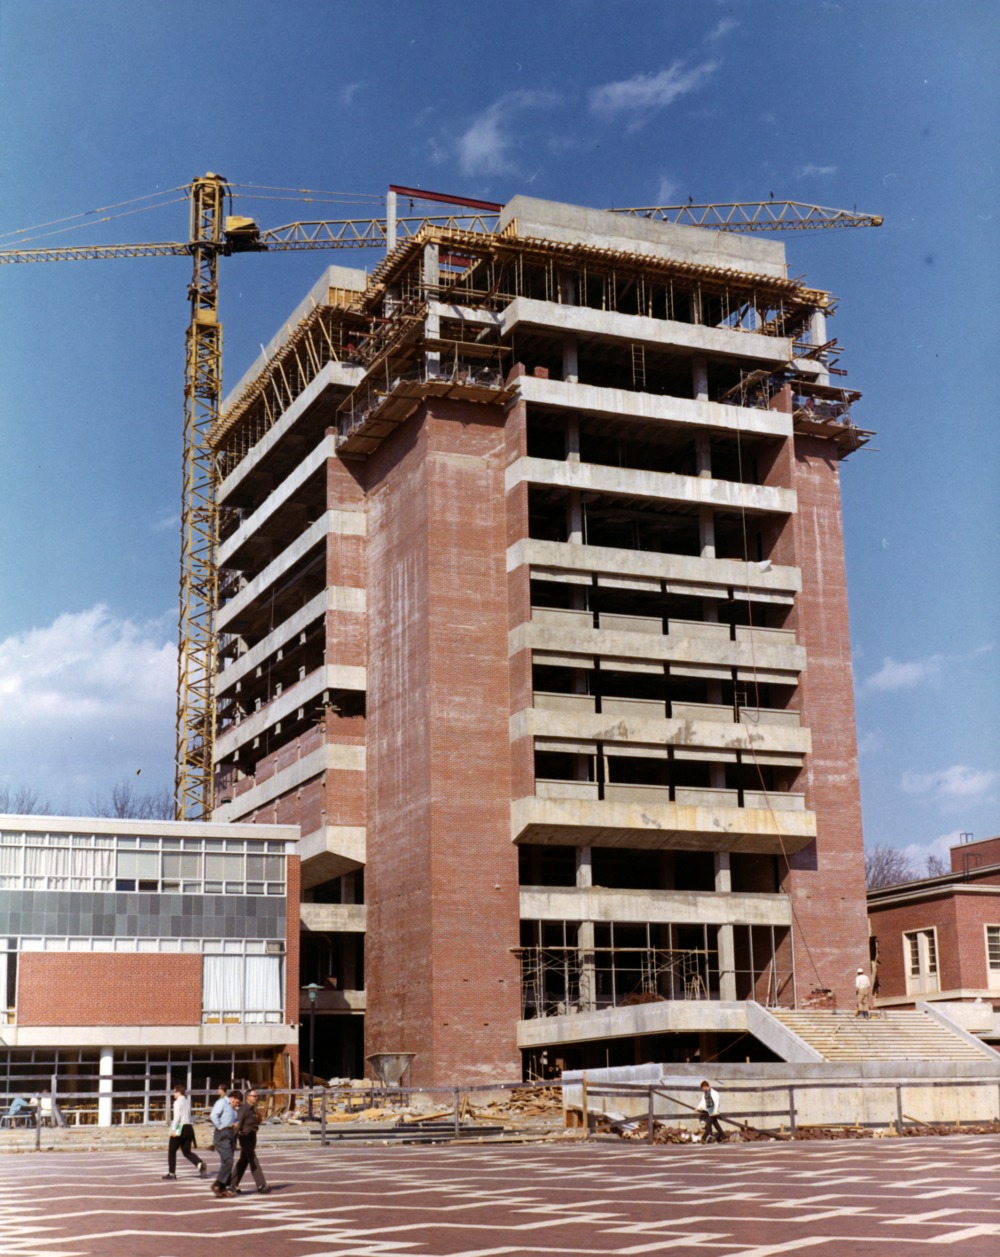 D.H. Hill Jr. Library bookstack tower under construction, ca. 1970